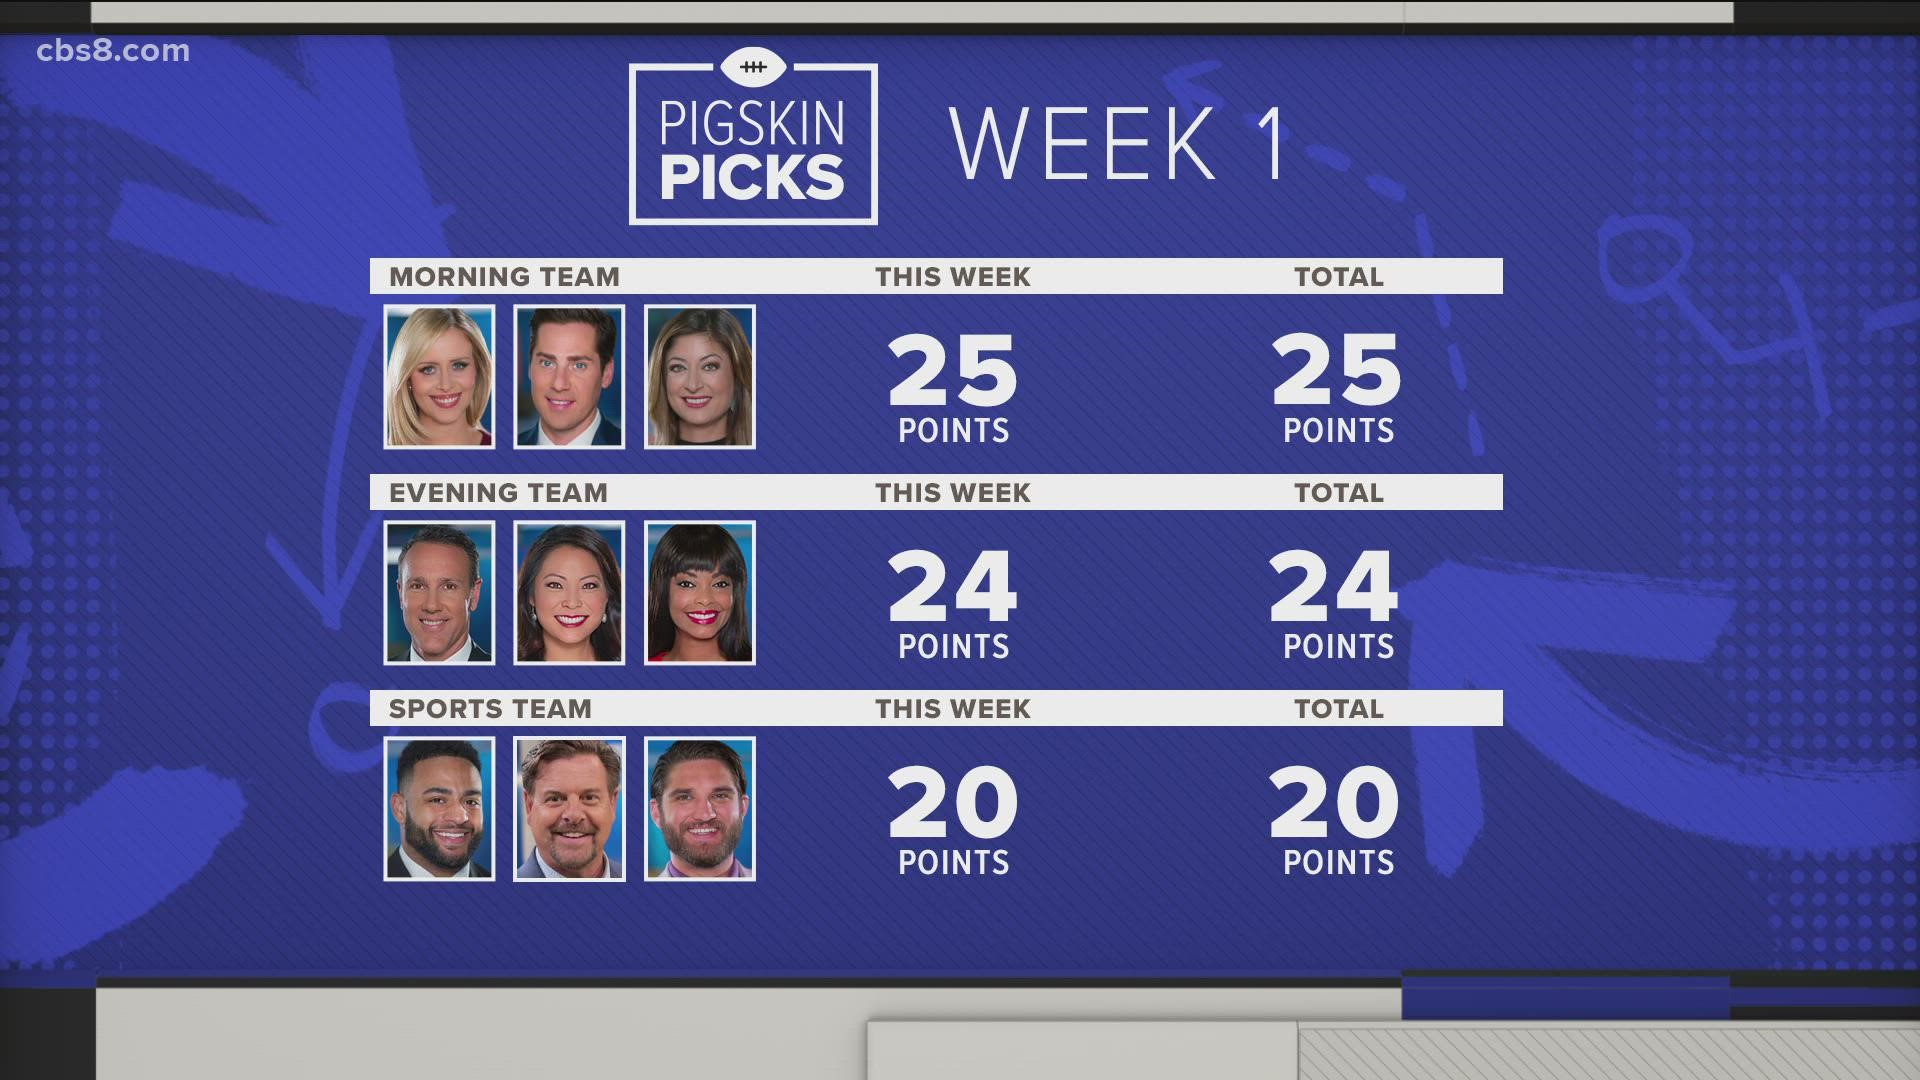 After the first week of the season, the morning team is leading over the evening team and the sports team by picking the most NFL winning teams from week 1.